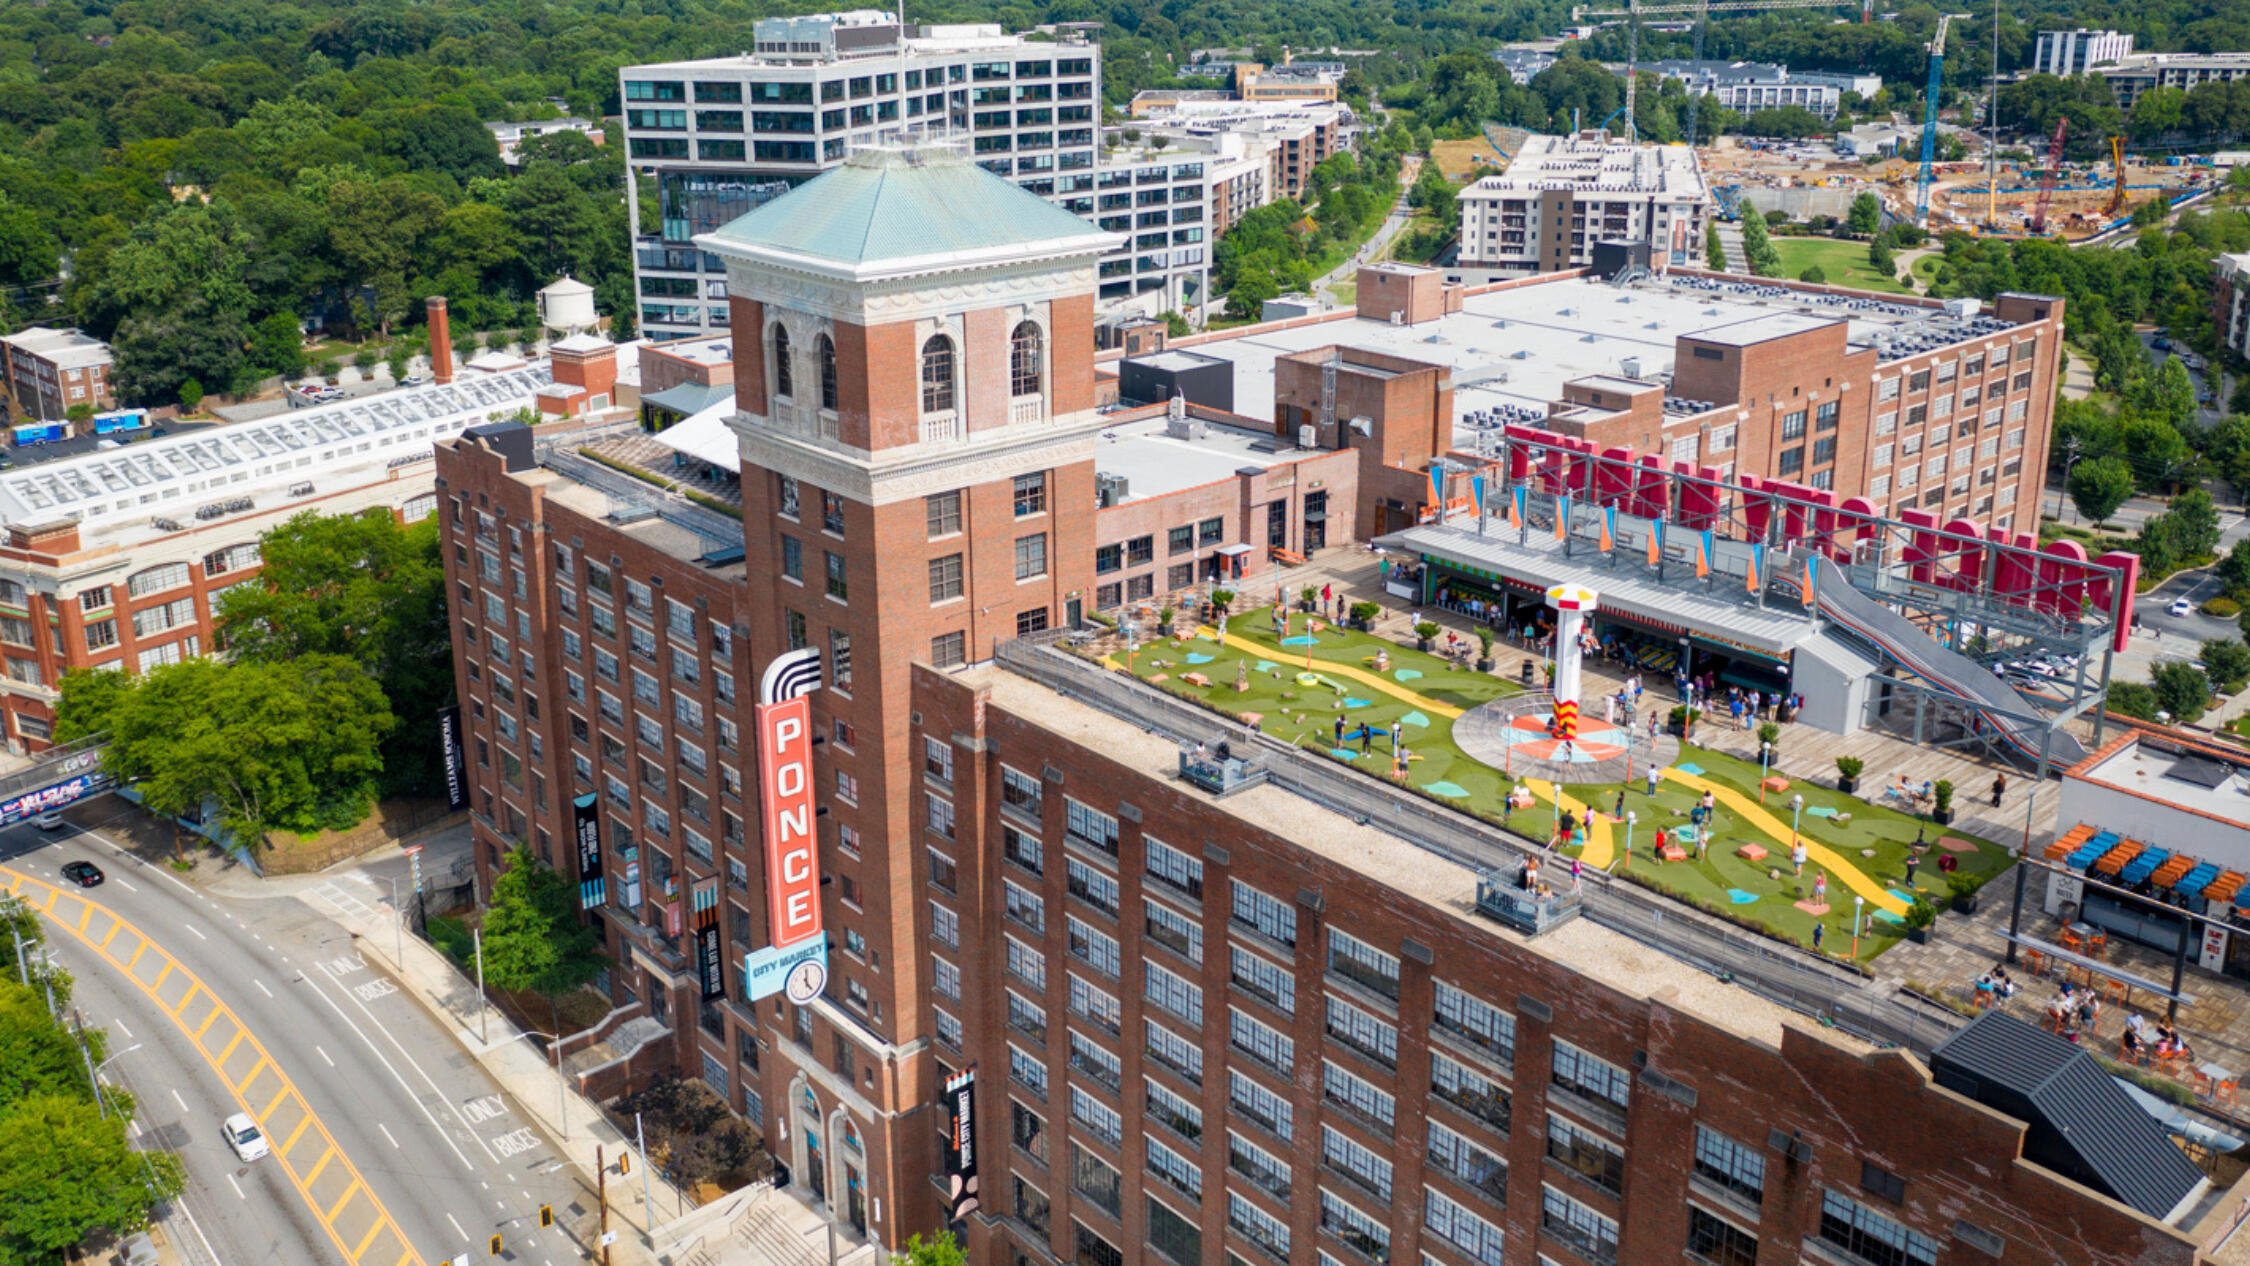 Aerial view of Ponce City Market featuring the Rooftop amusement park